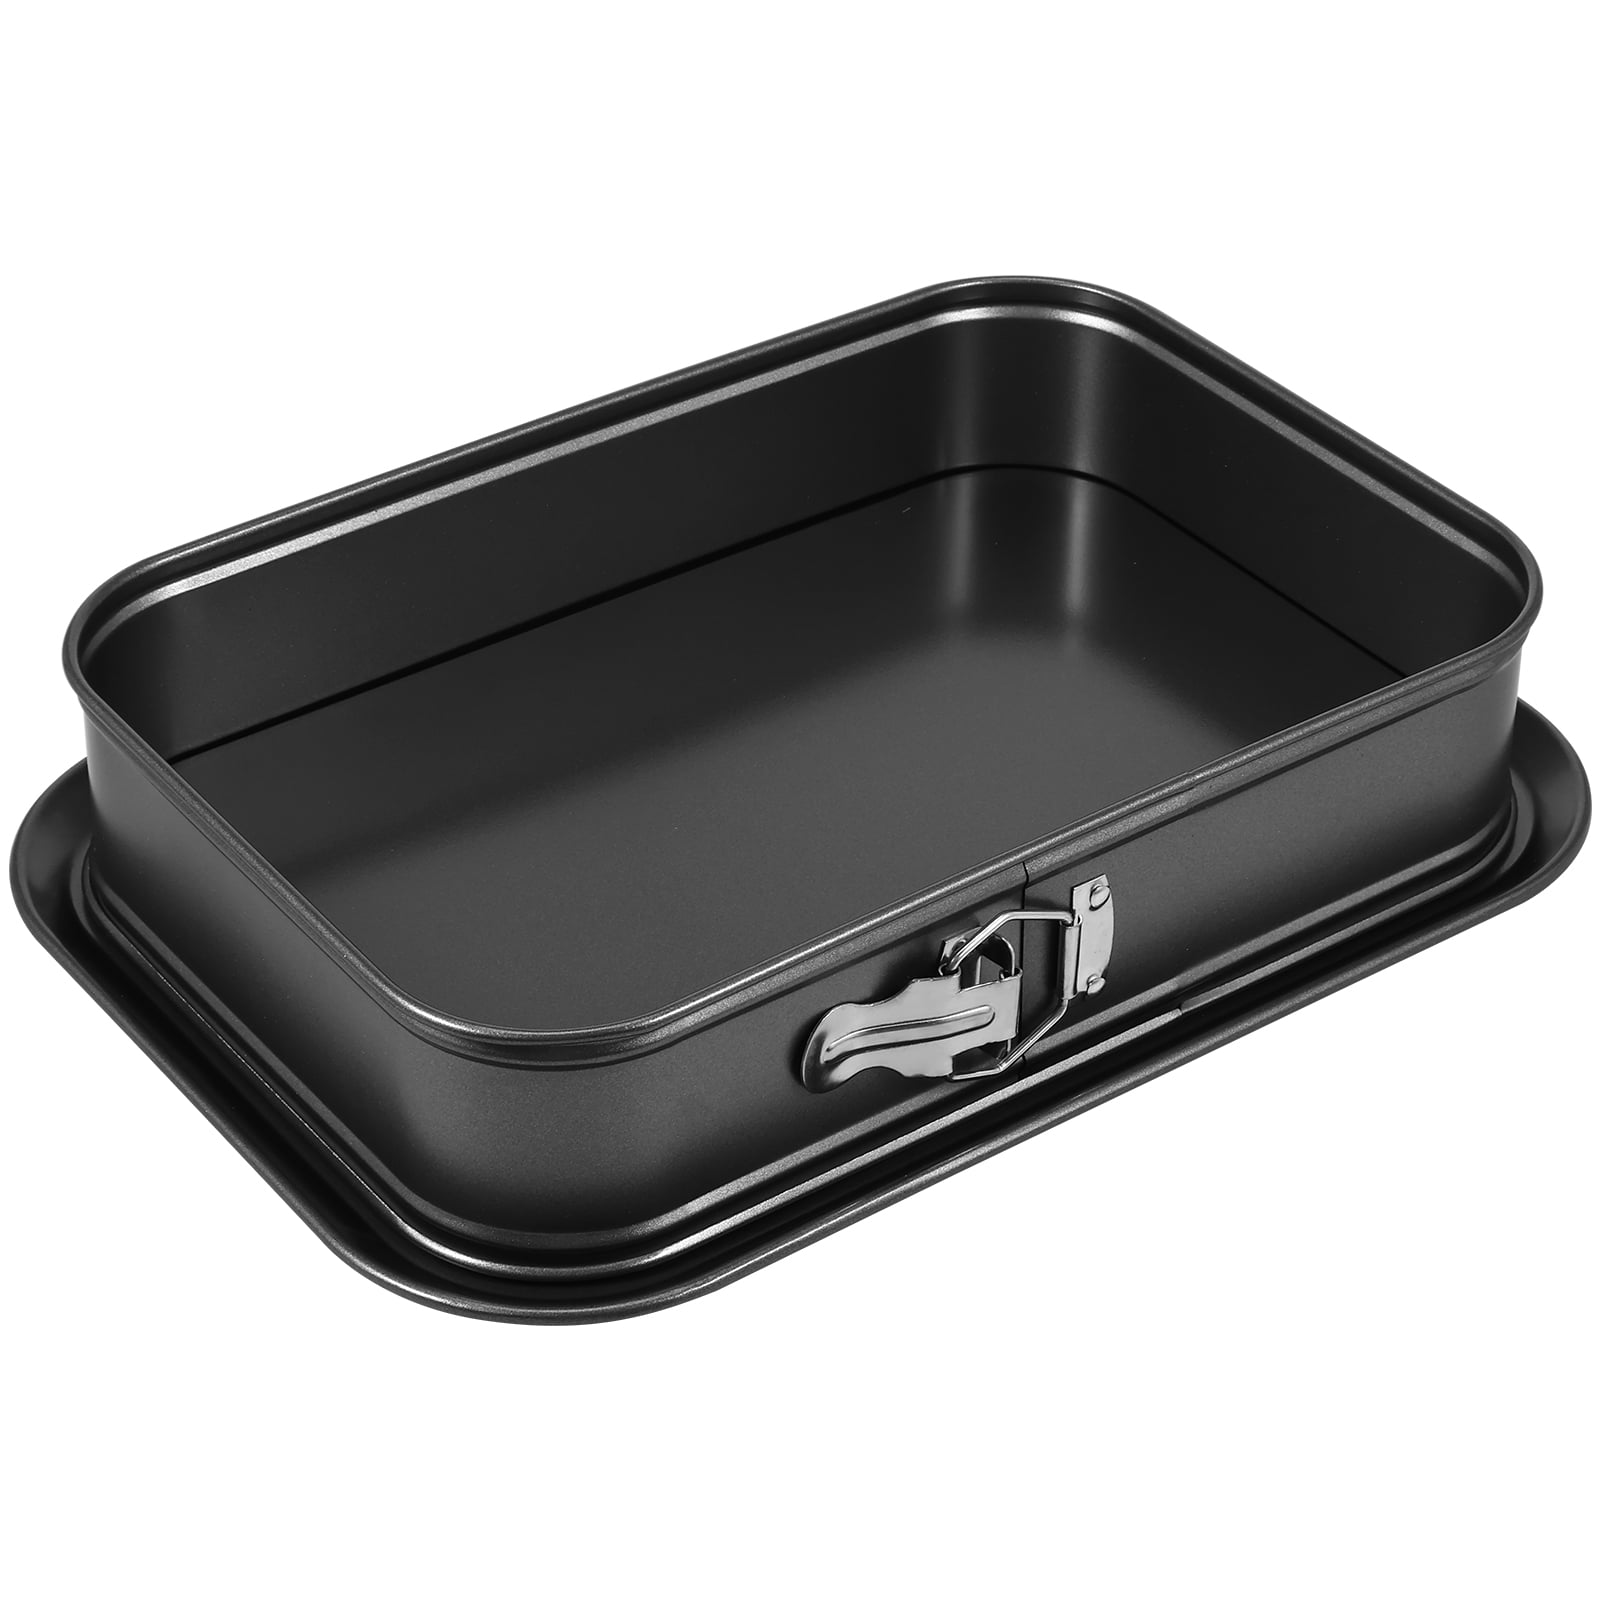 Johnson Rose 63414 14 x 2 in. Straight Sided Cake Pan with a